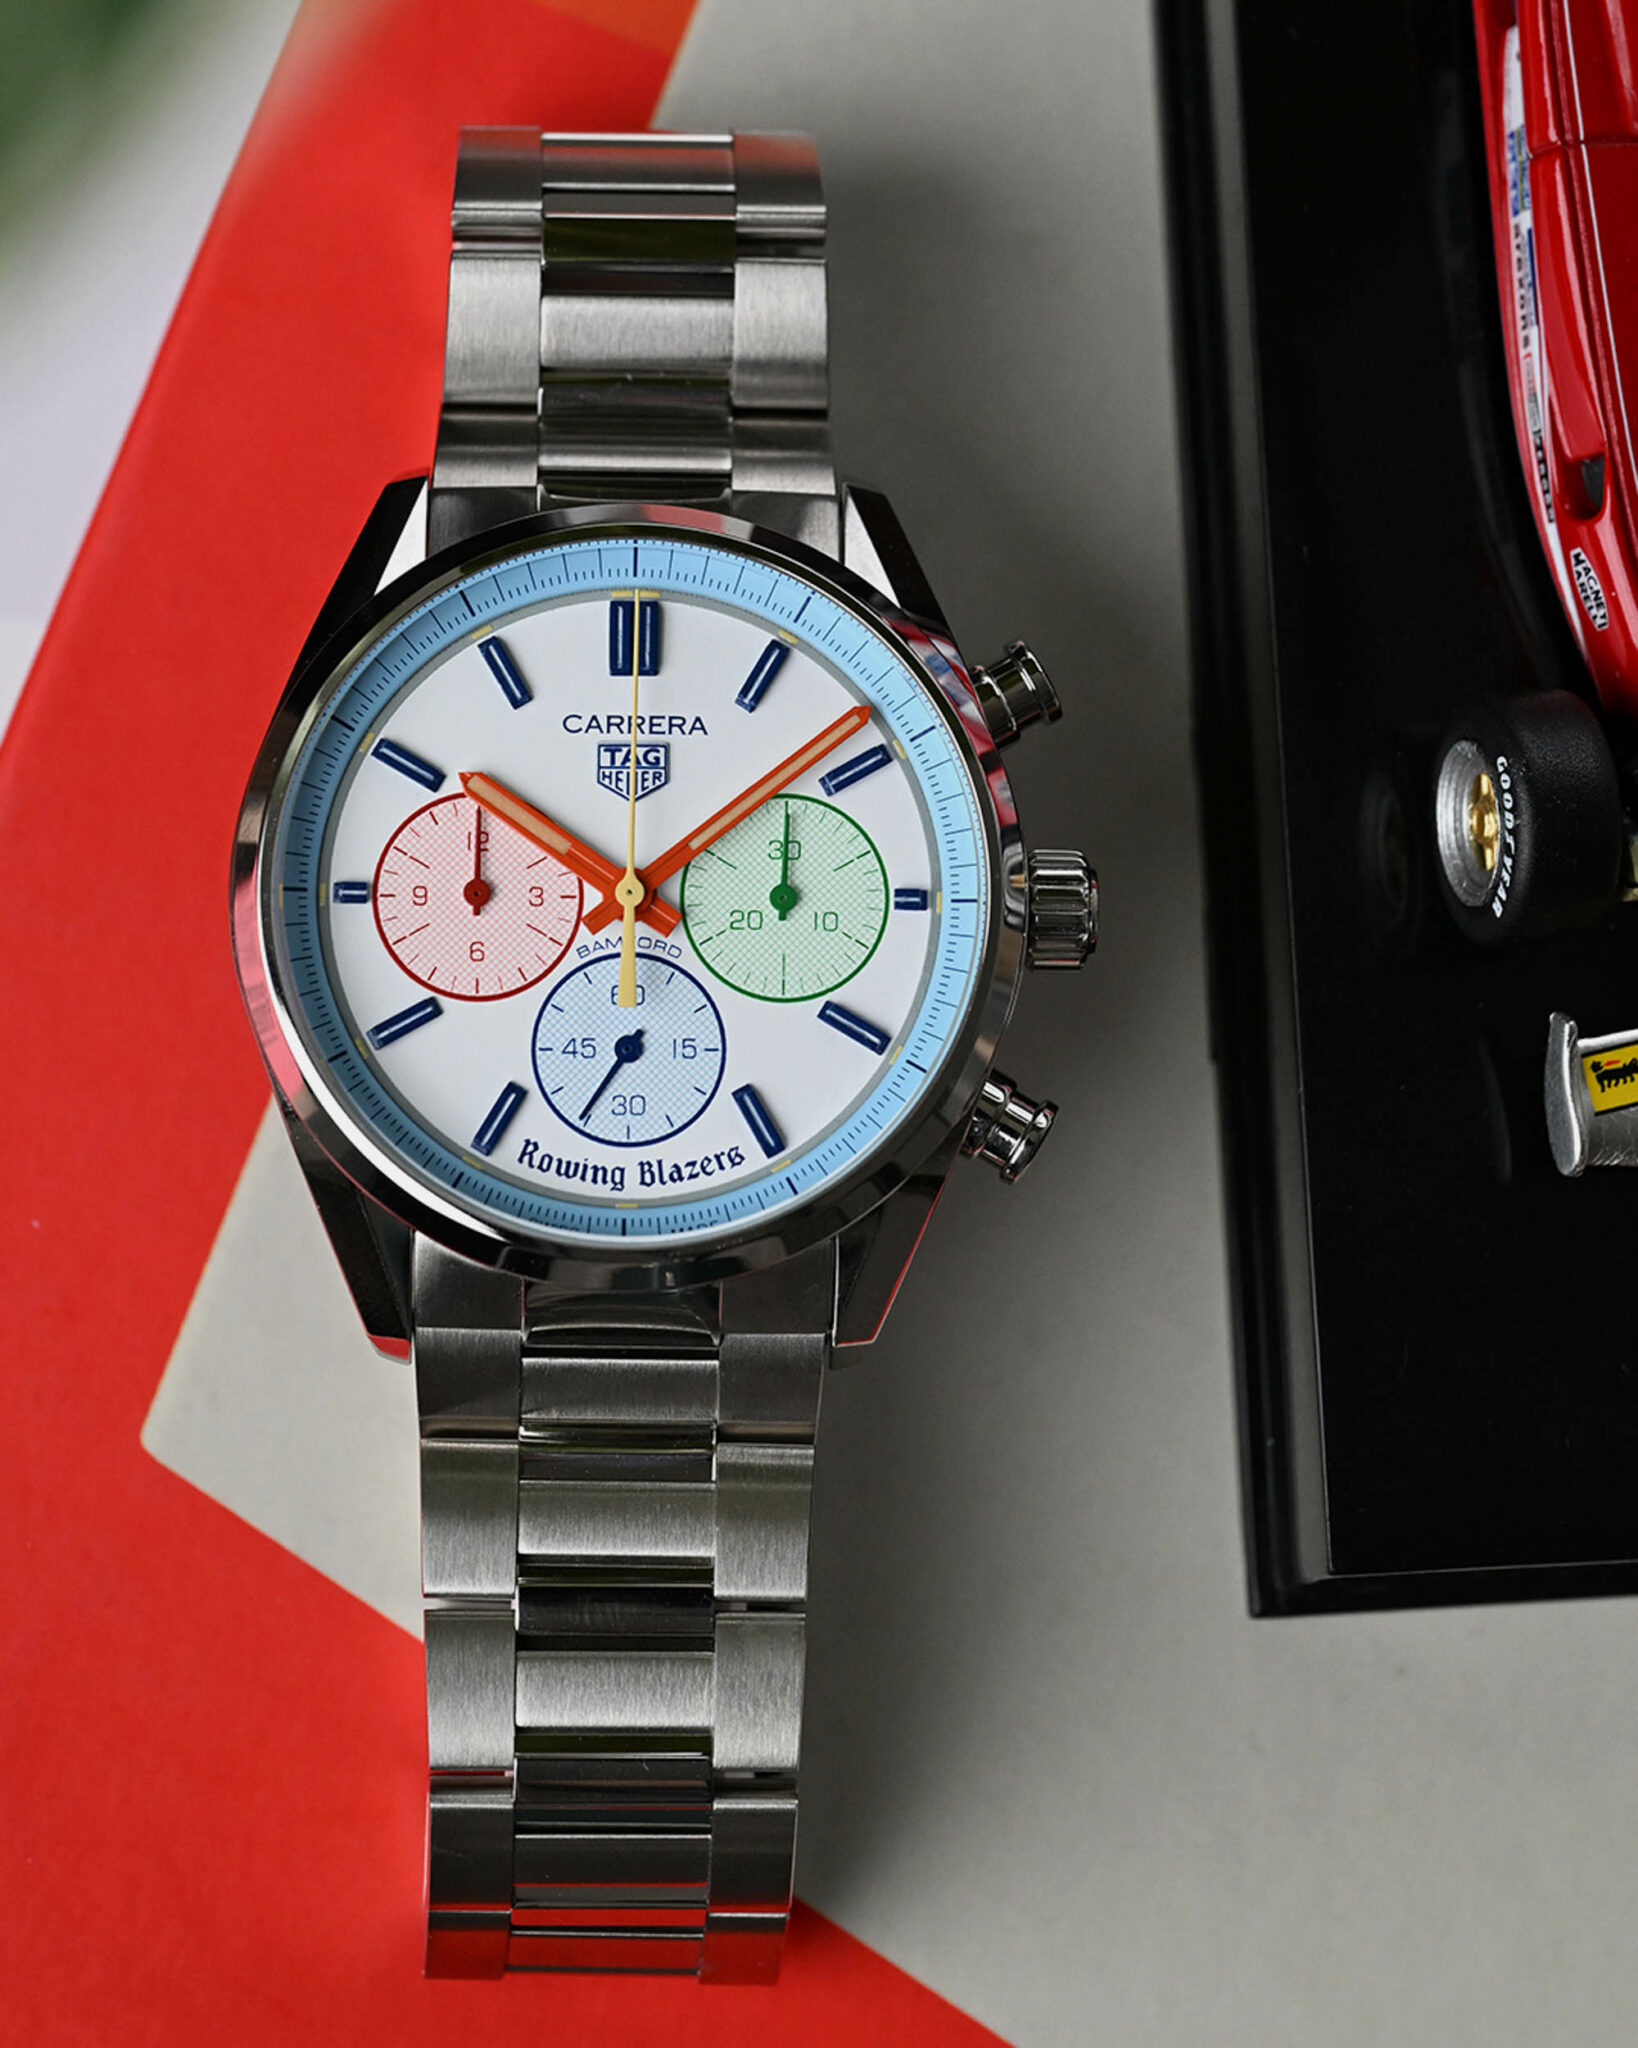 The Best Quality TAG Heuer Carrera Watches